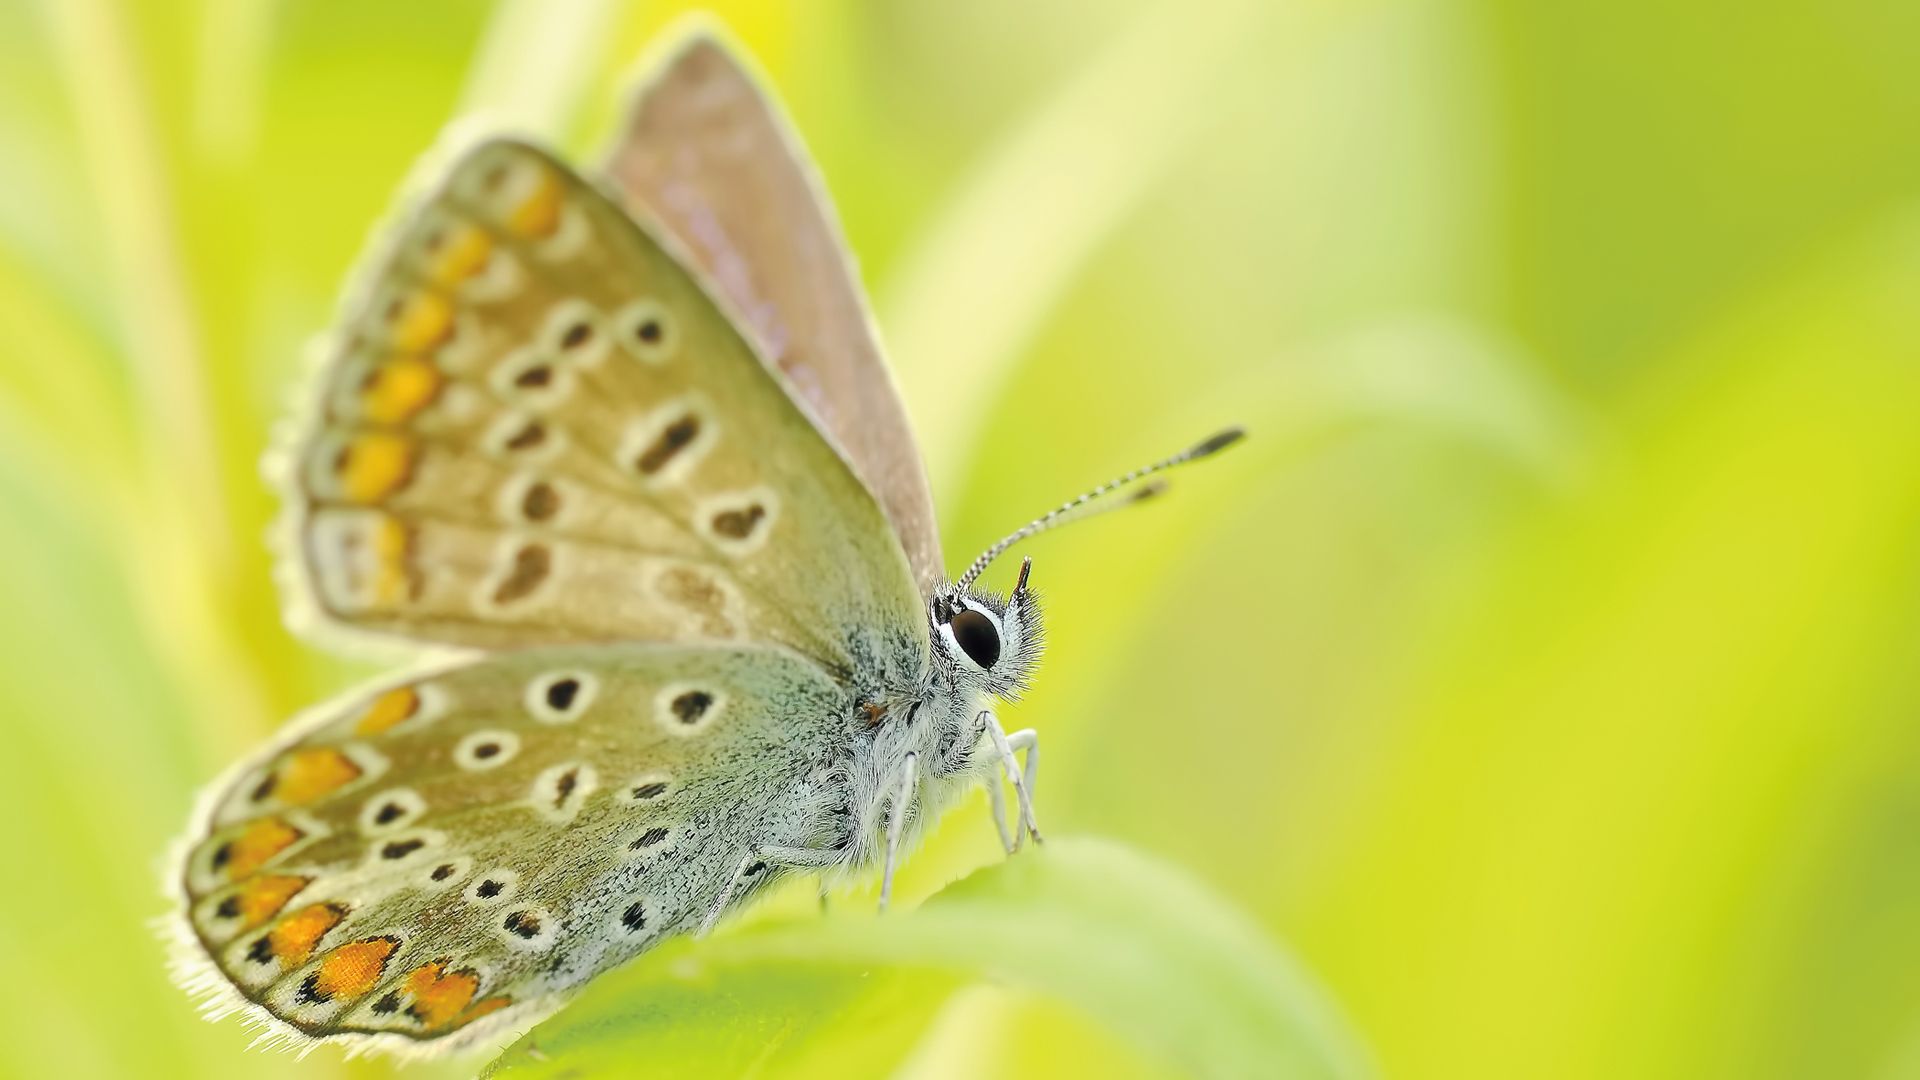 Yellow Brown And Silver Butterfly - Butterfly Images Hd Whatsapp Free Download - HD Wallpaper 